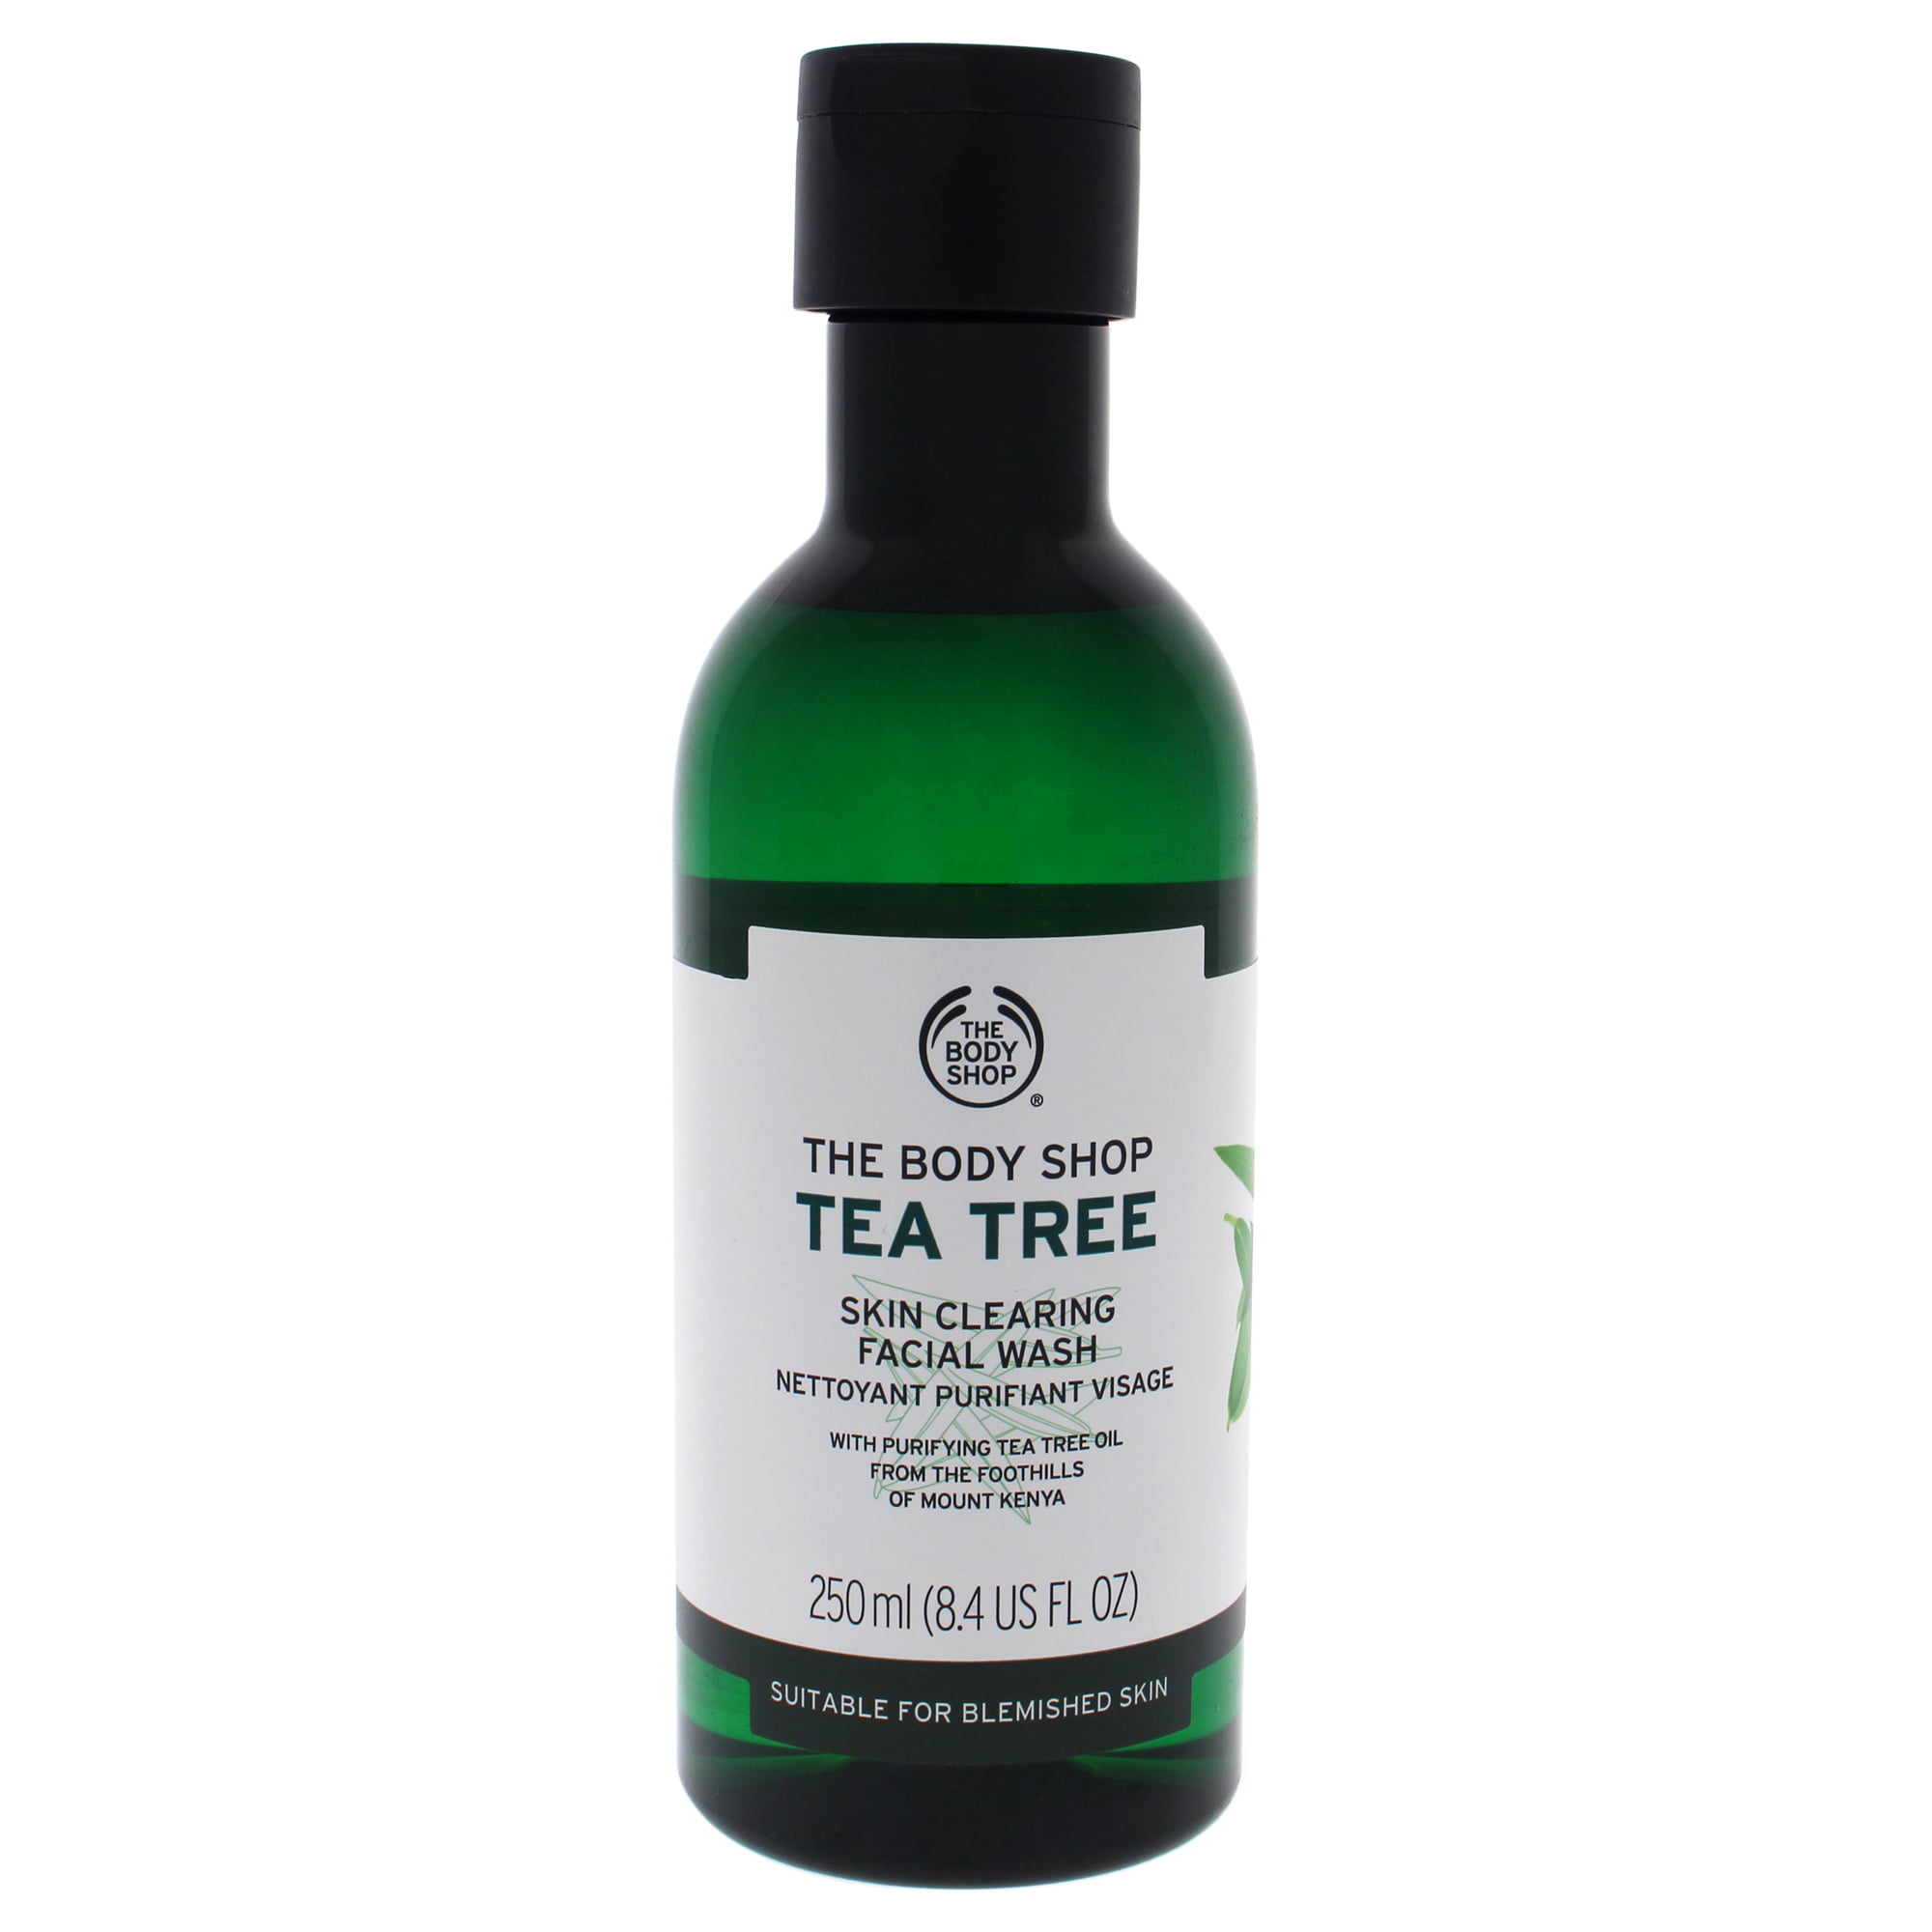 Tea Tree Skin Clearing Facial Wash by The Body Shop for Unisex - 8.4 oz ...